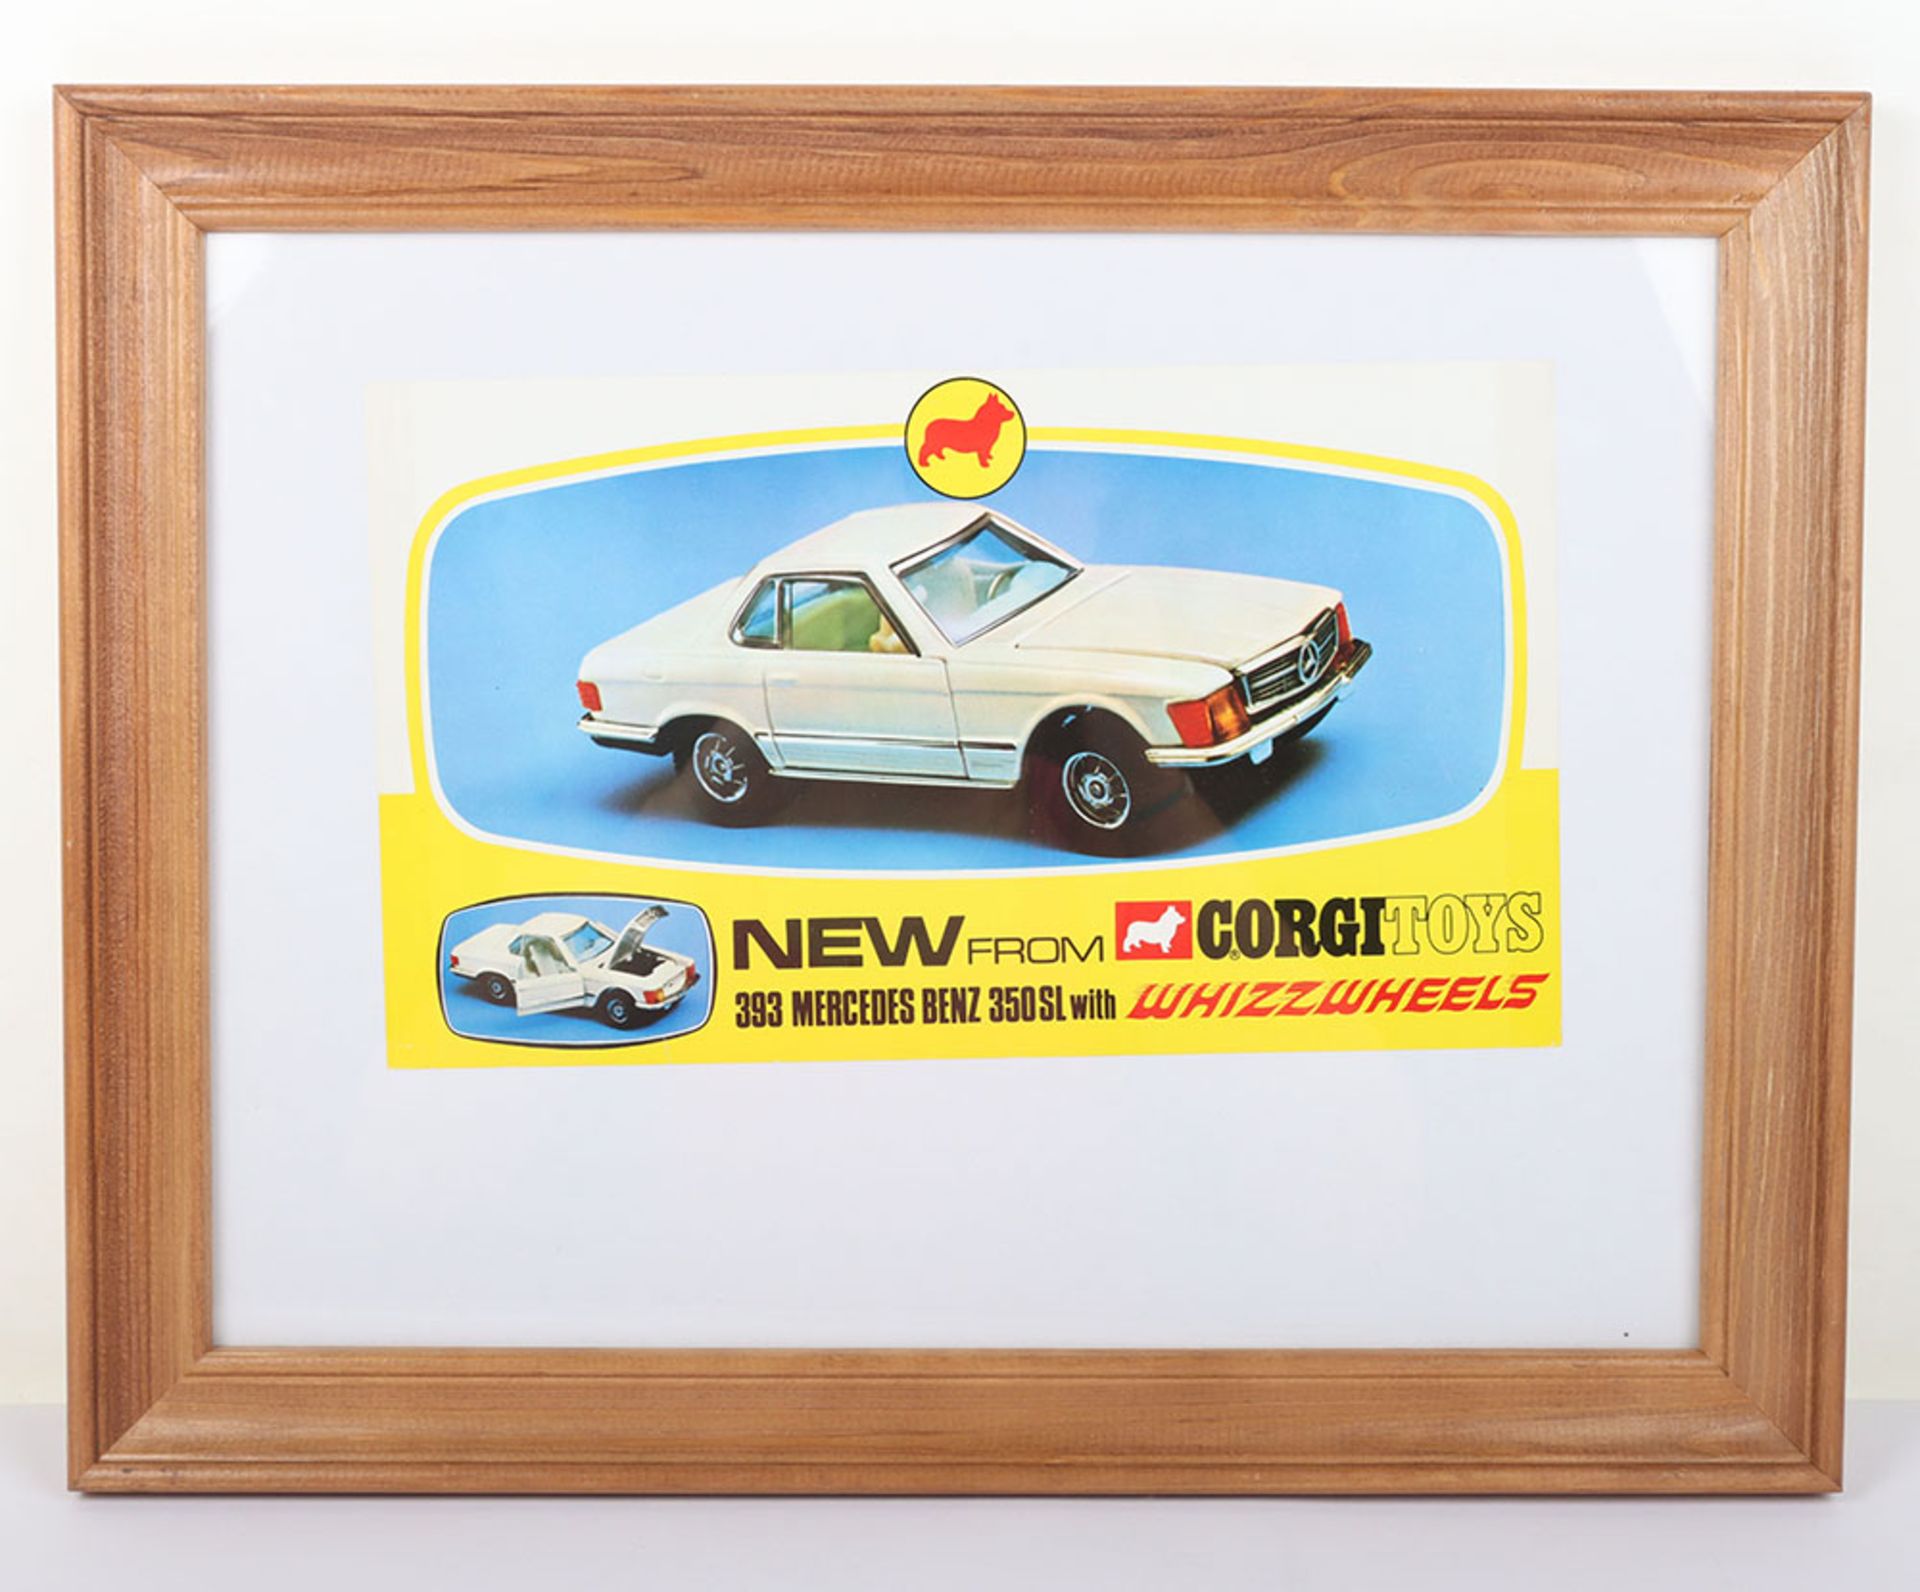 Original New from Corgi Toys 393 Mercedes Benz 350SL with Whizzwheels, Shop window poster